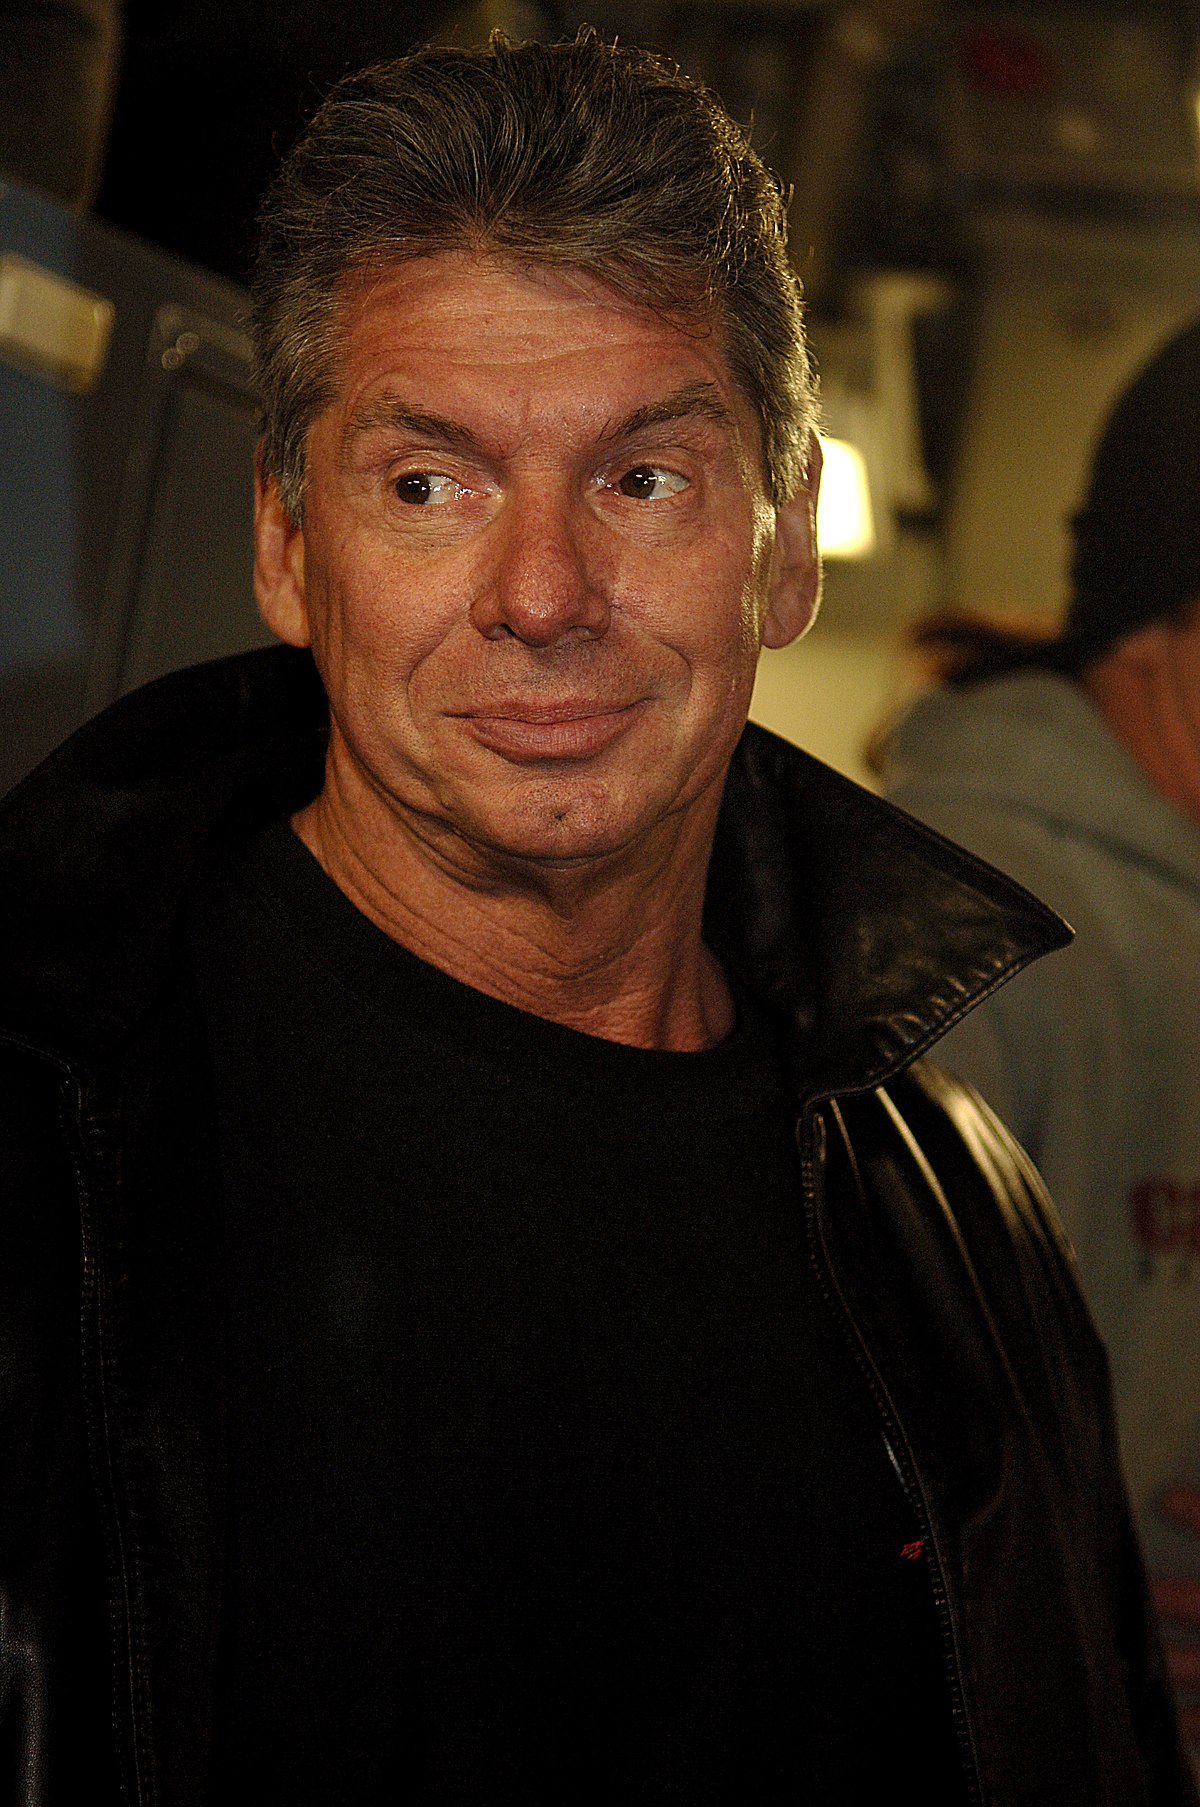 Vince McMahon ventures down as WWE CEO